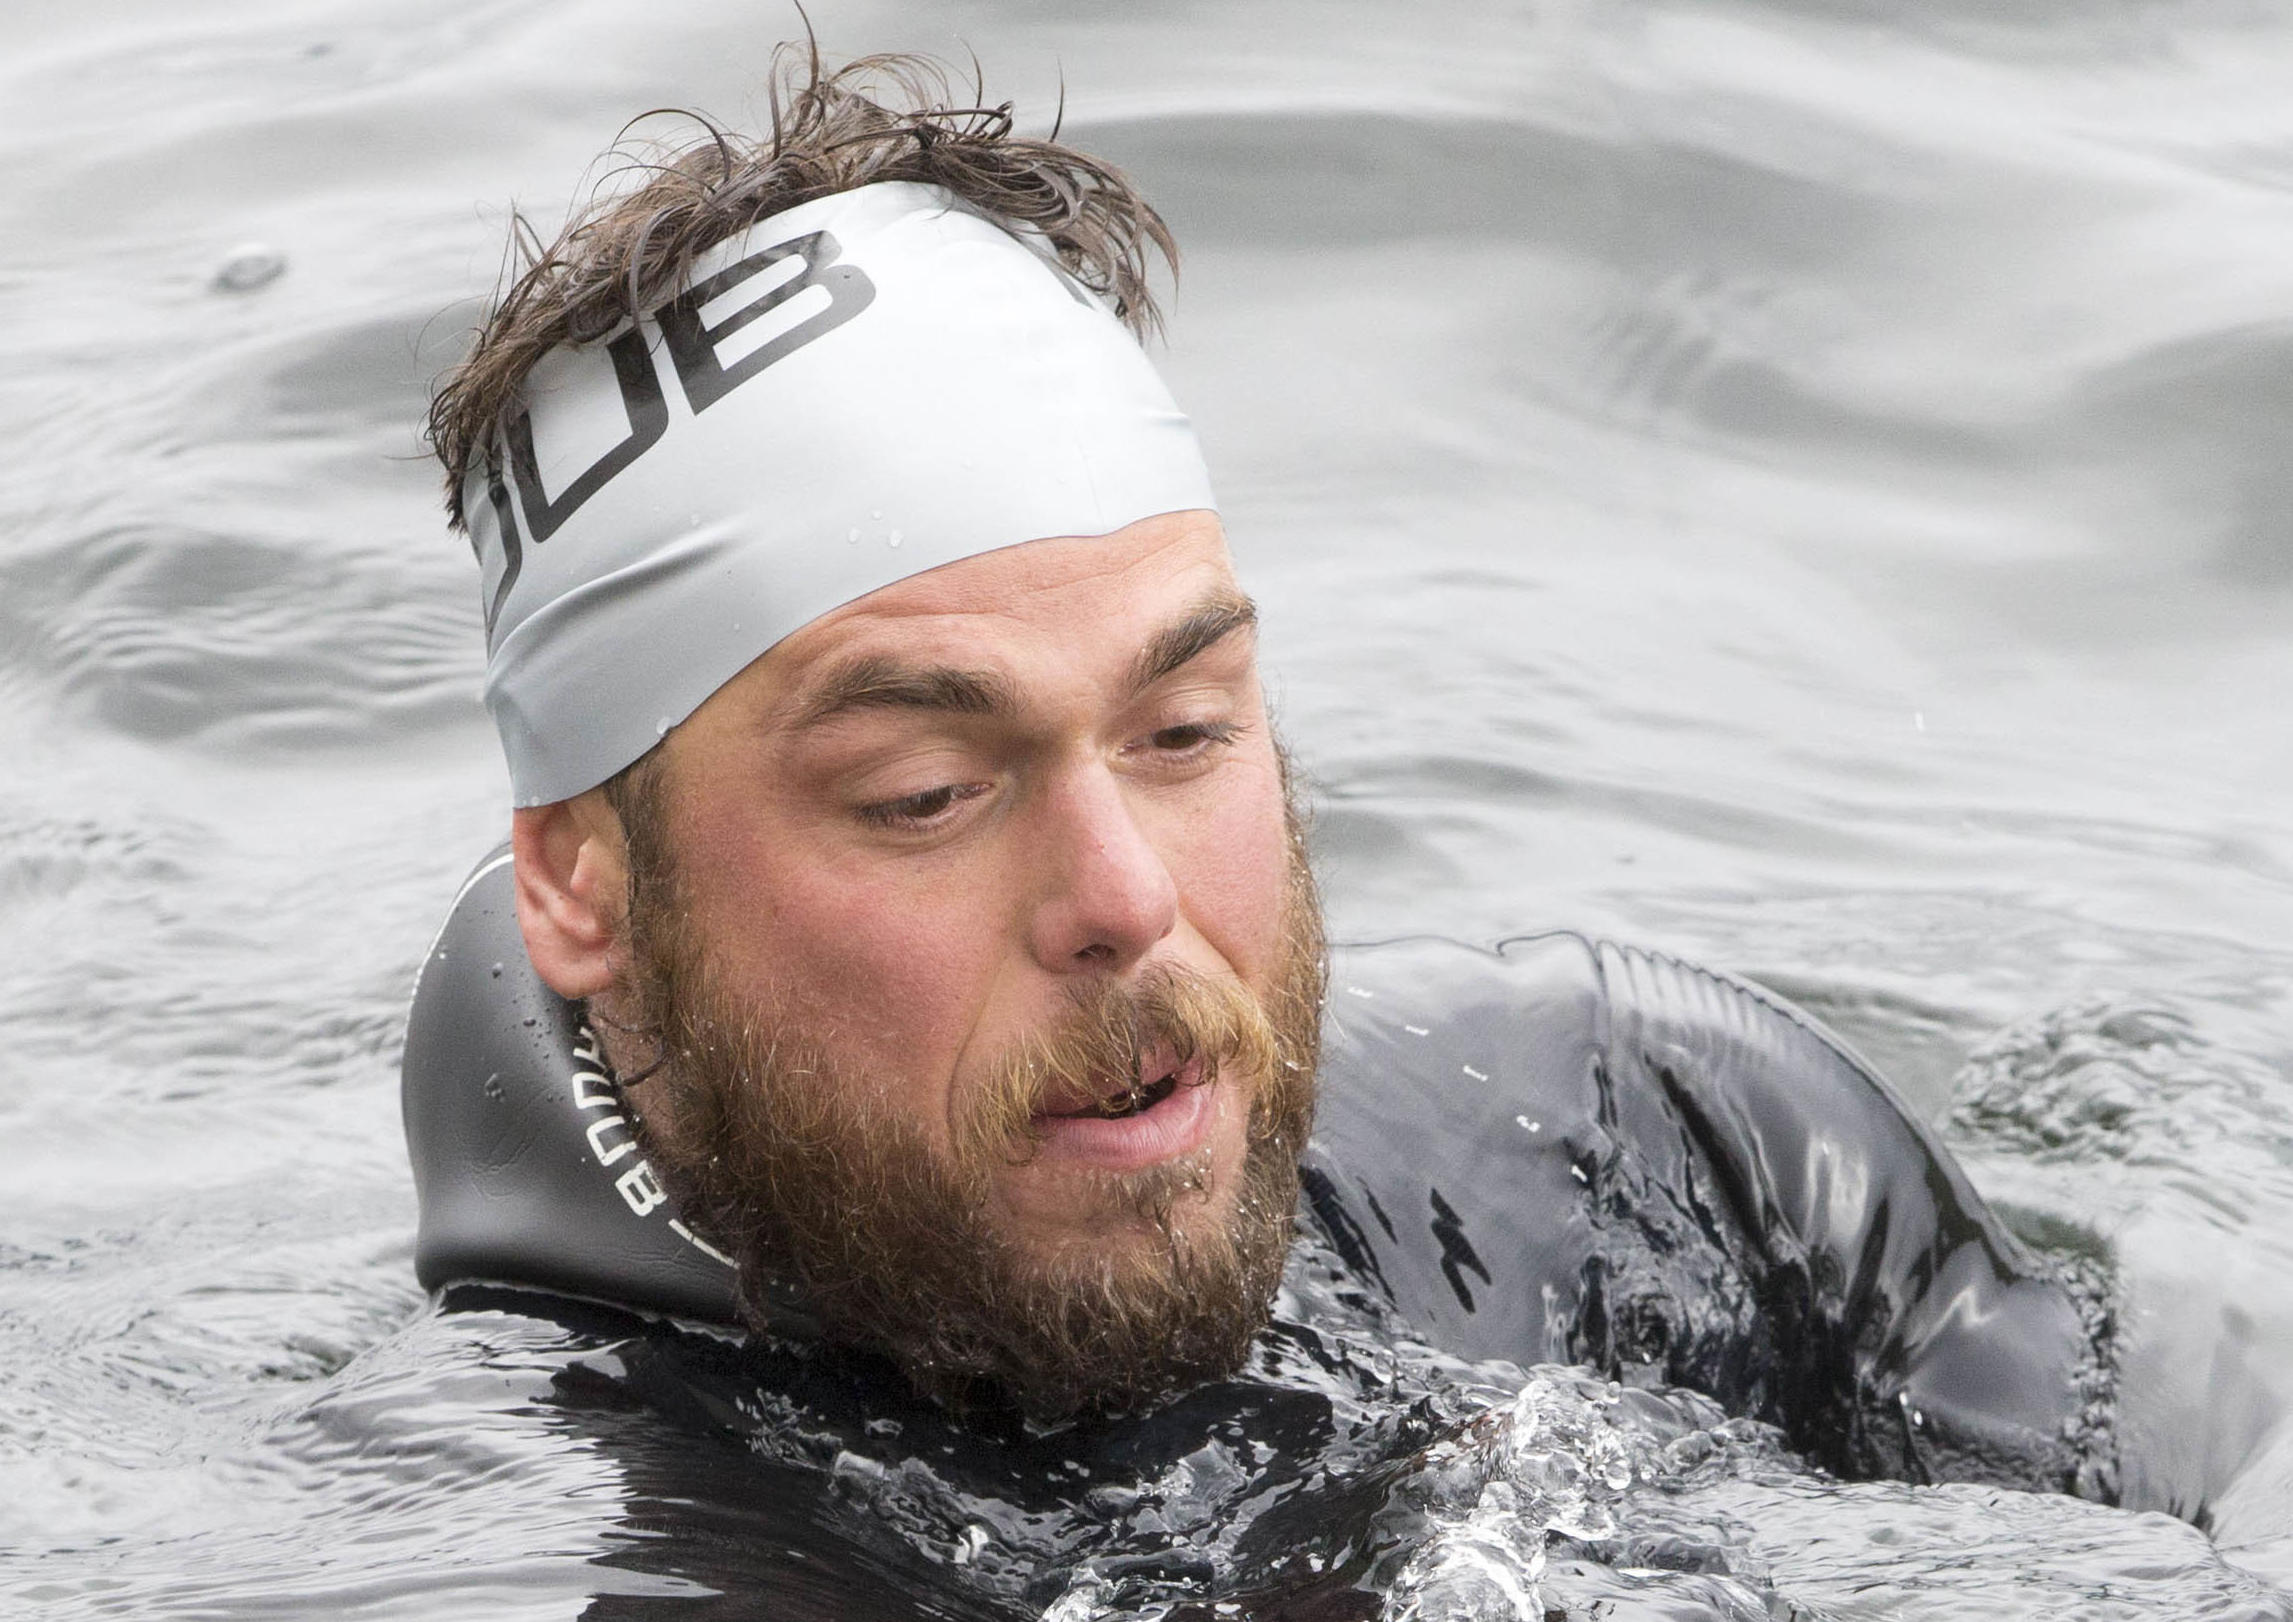 He now feels like a 'captive goldfish' in swimming pools after becoming the first swimmer to circumnavigate Great Britain.